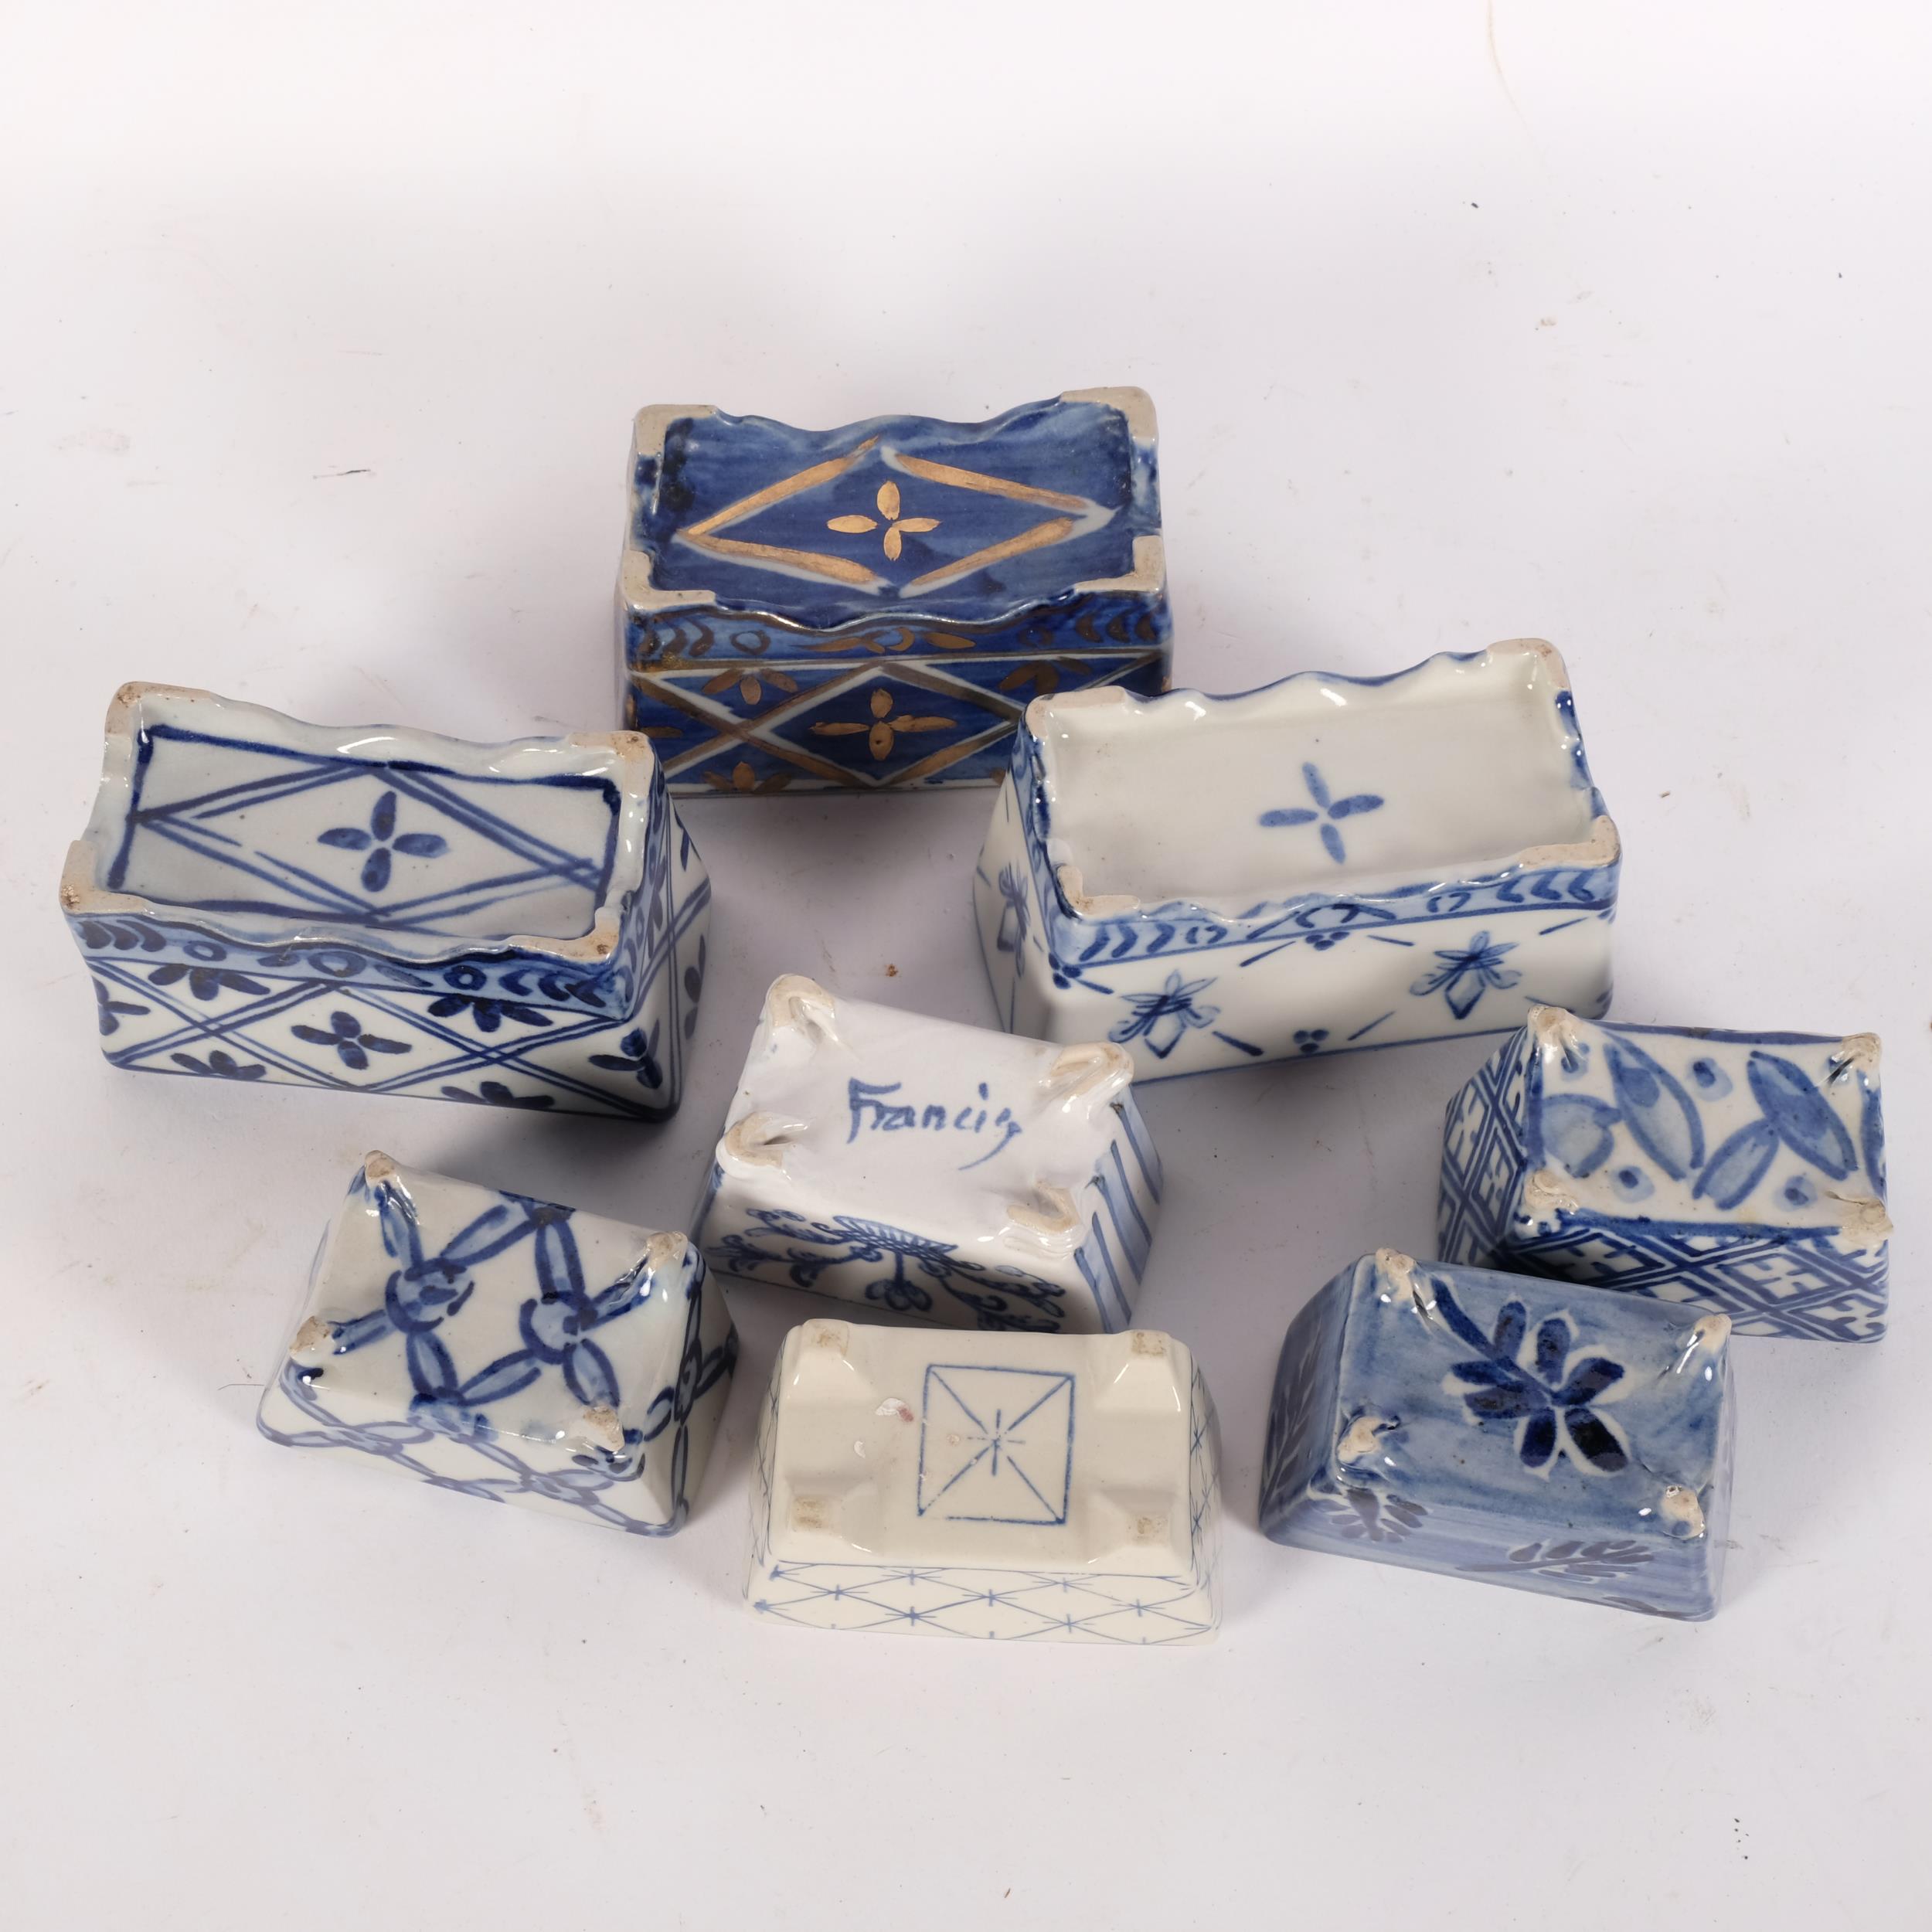 8 Delft pottery flower bricks, largest length 11.5cm (3) Good condition - Image 2 of 2